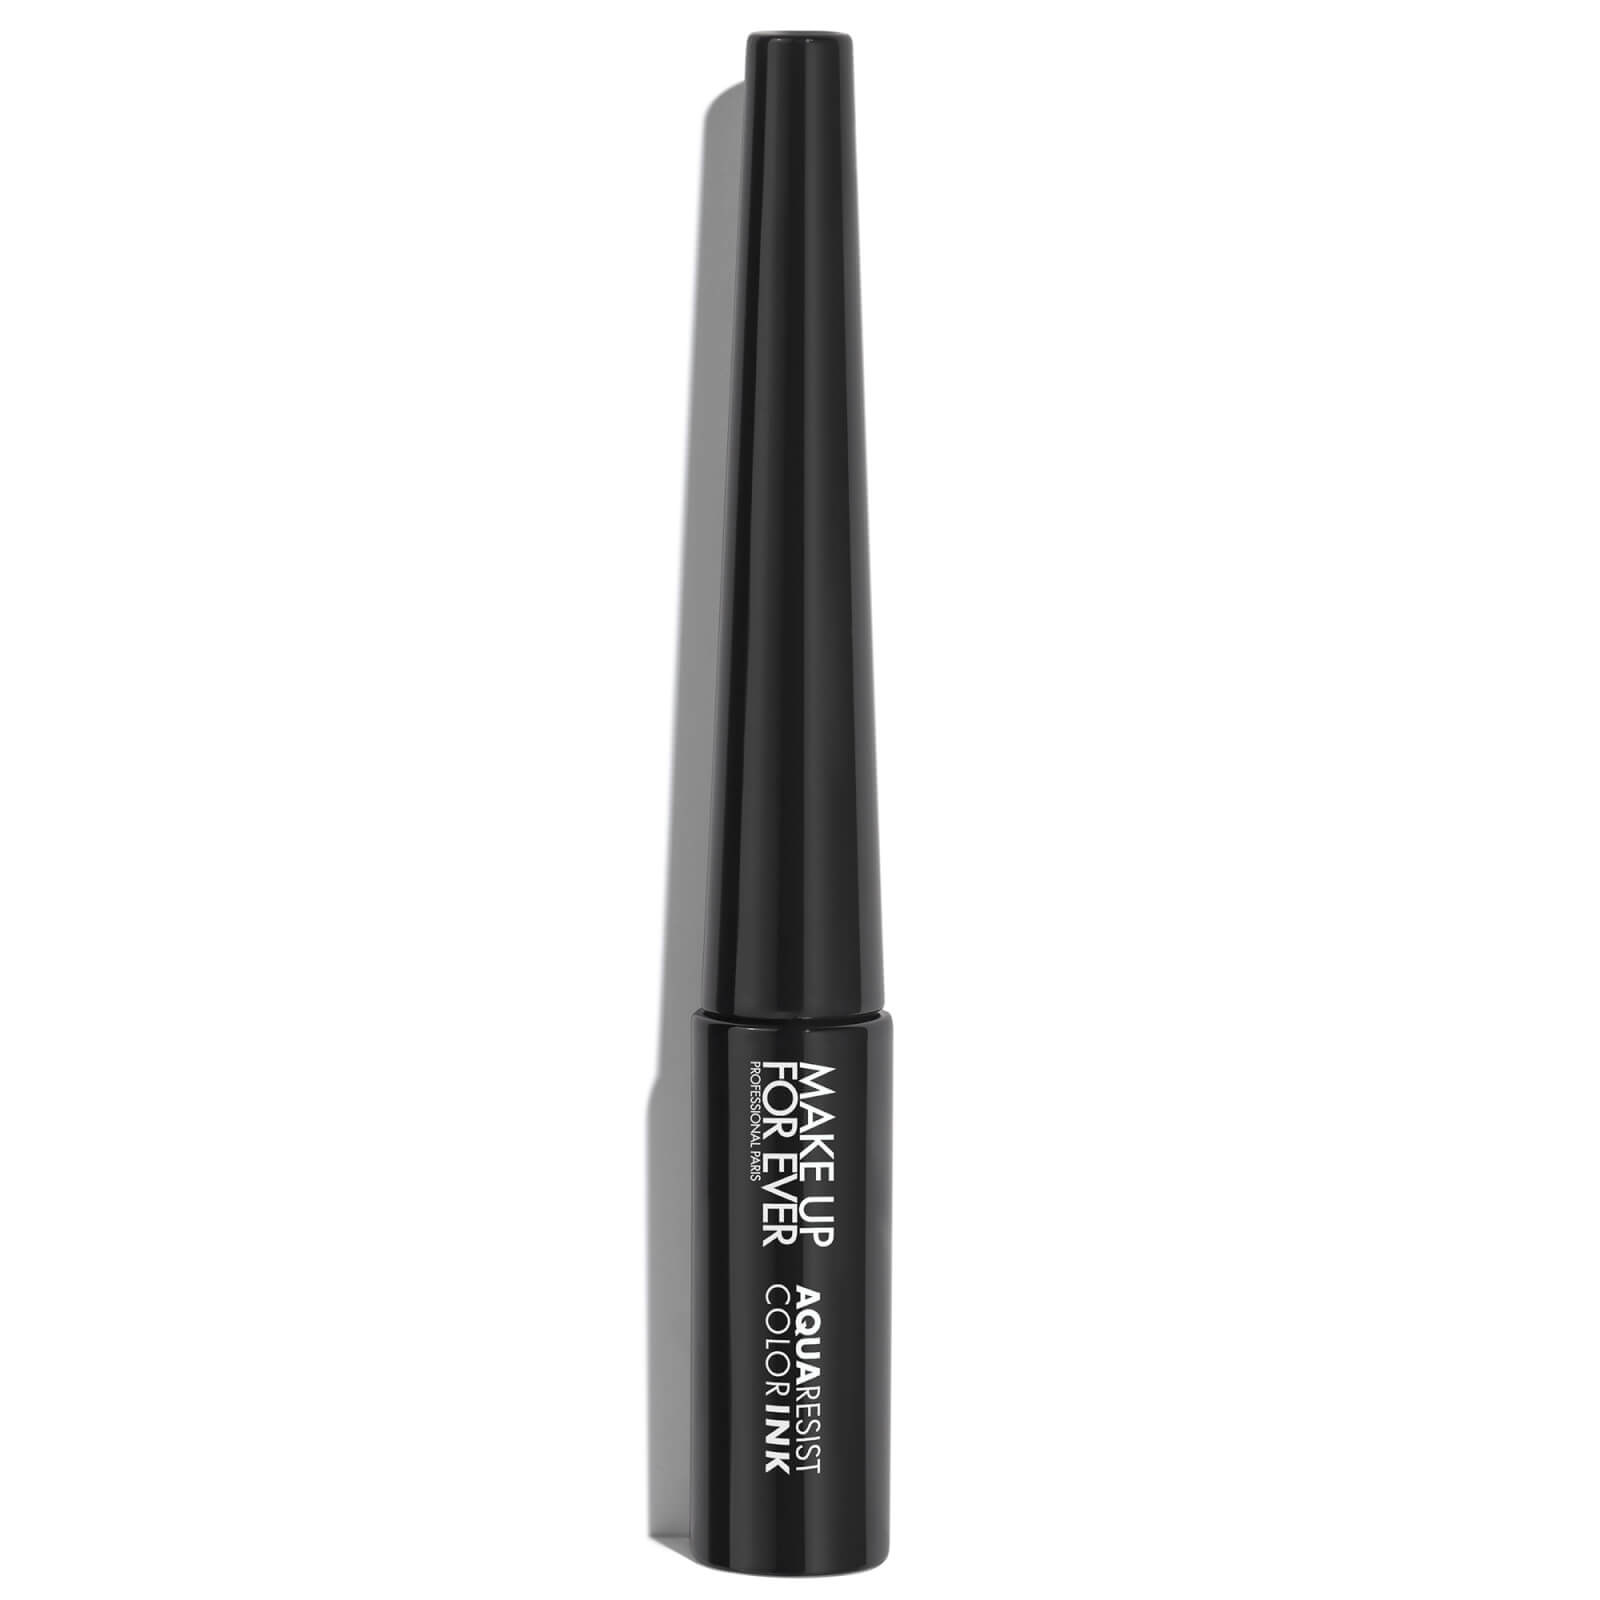 MAKE UP FOR EVER Aqua Resist Graphic Ink 2ml (Various Shades) - Matte Lipstick Charcoal